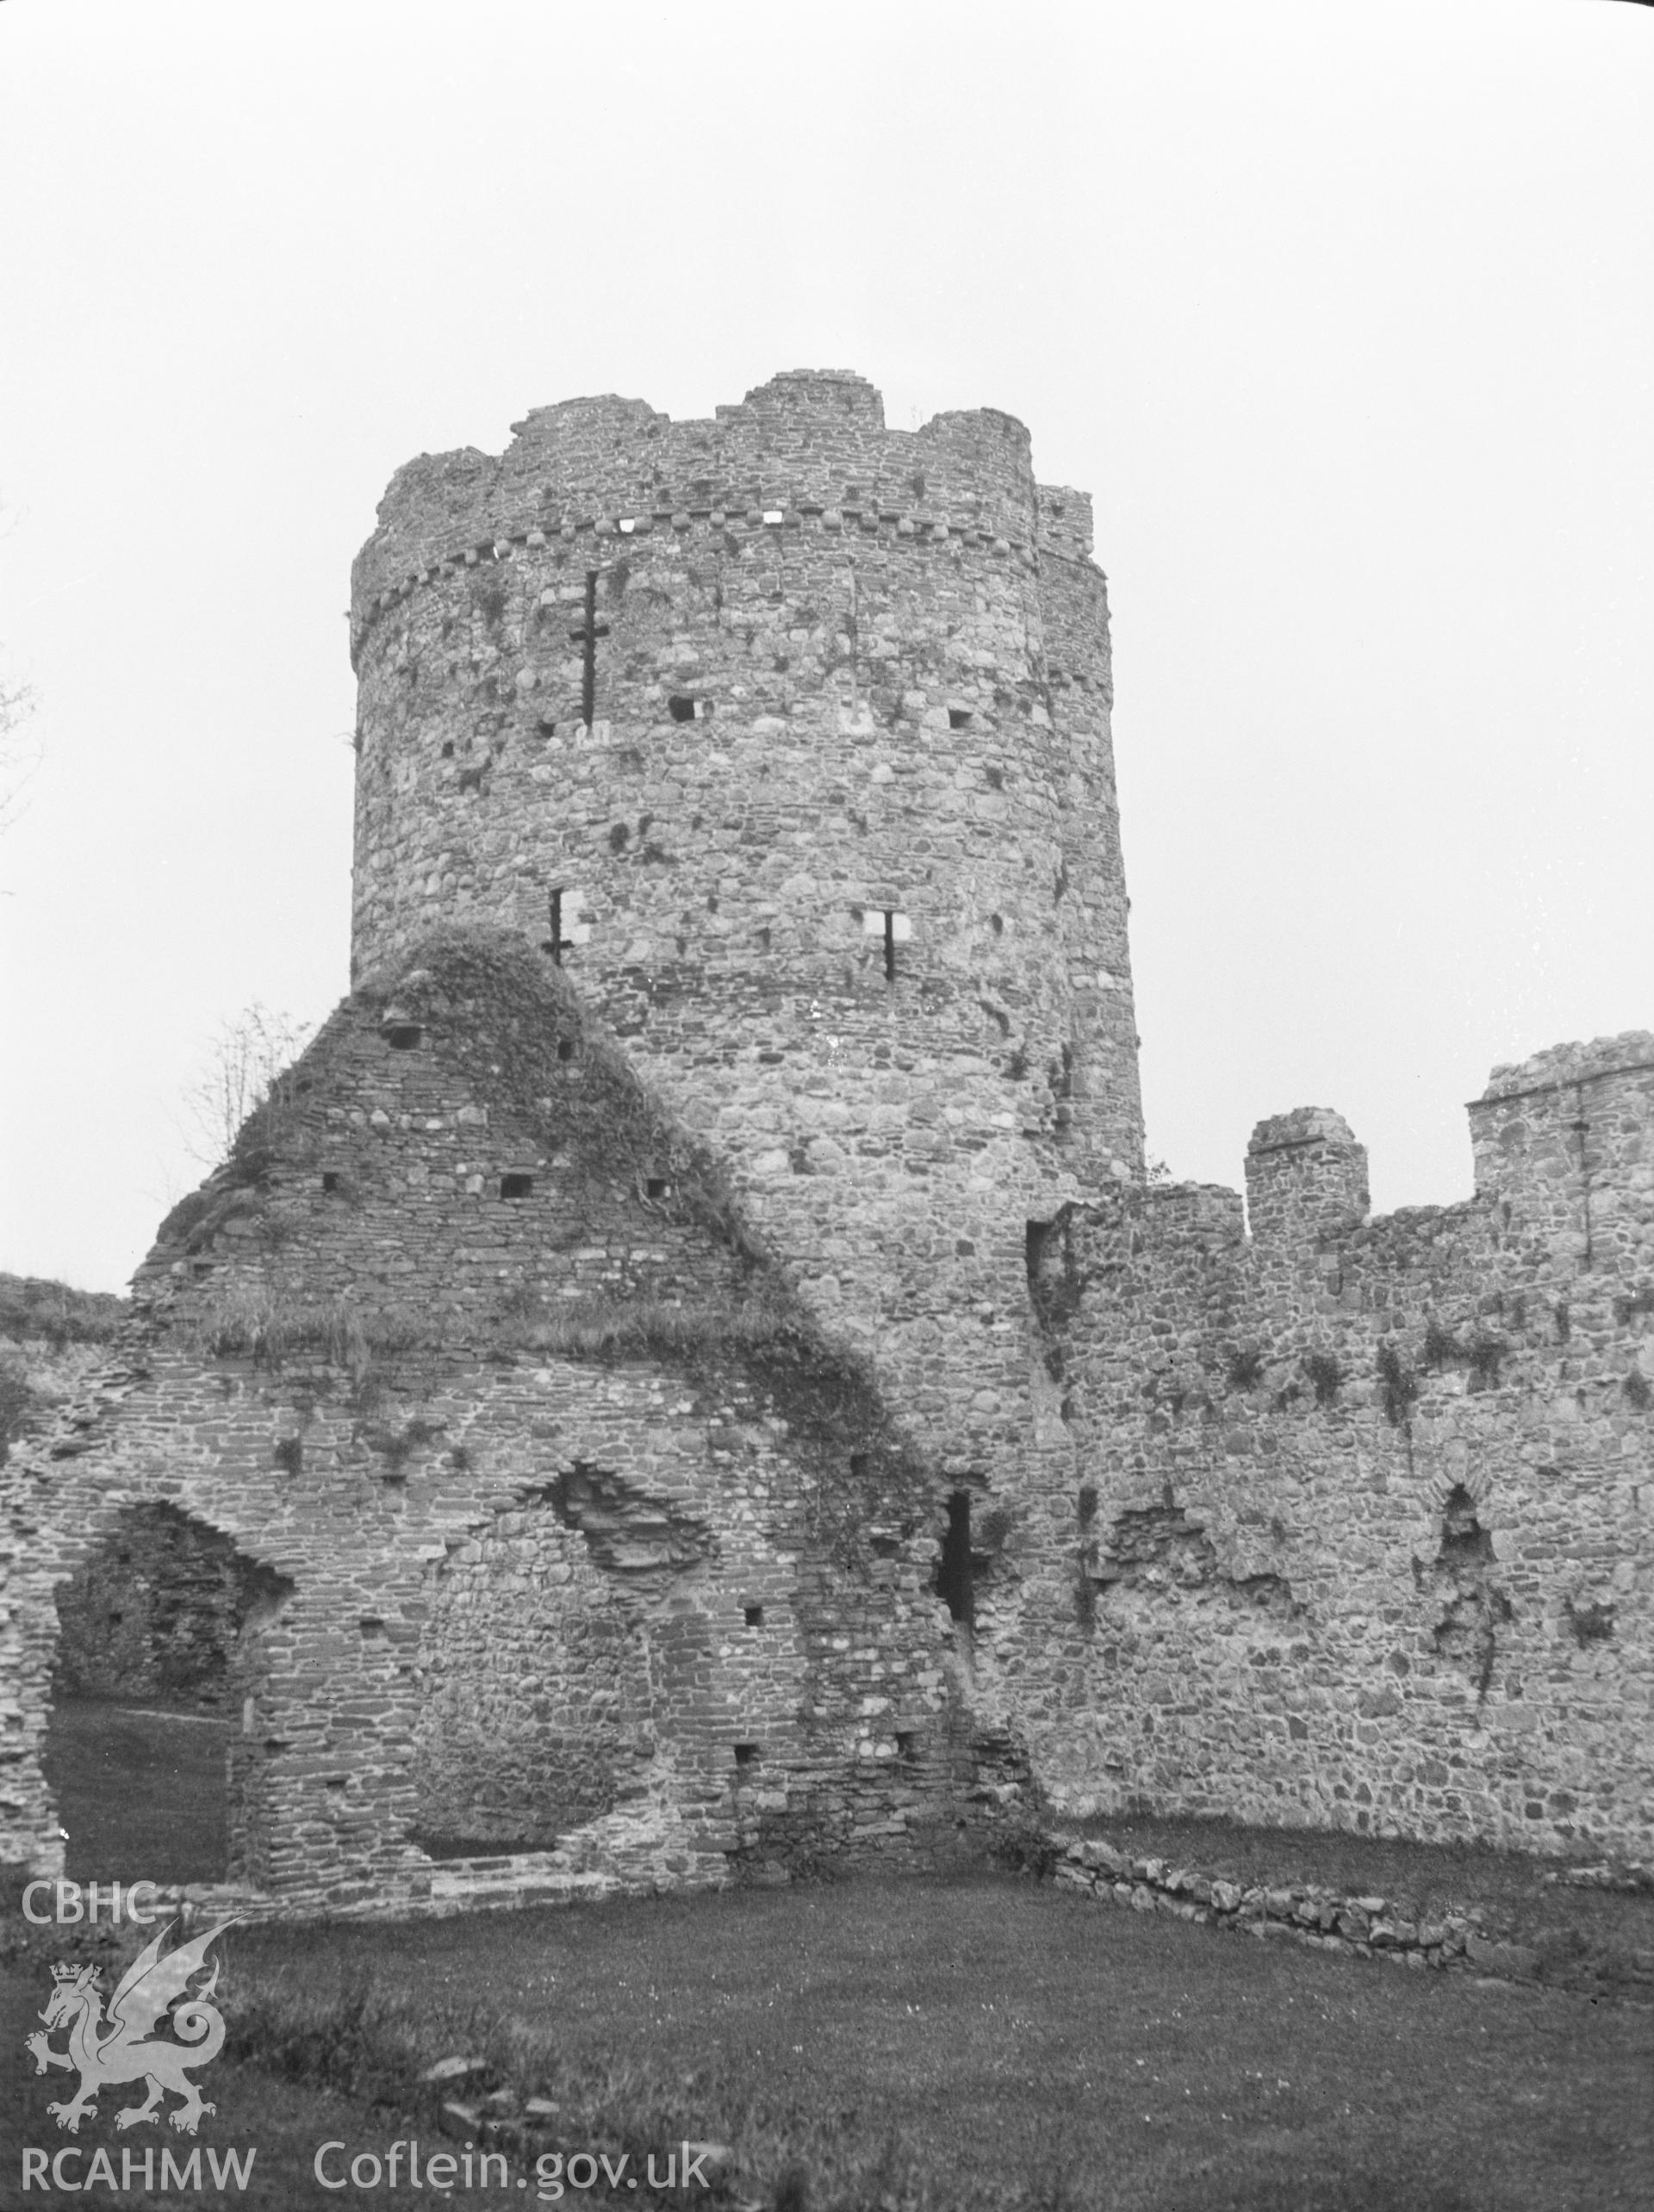 Digital copy of a nitrate negative showing exterior view of north-east drum tower, Kidwelly Castle. From the National Building Record Postcard Collection.